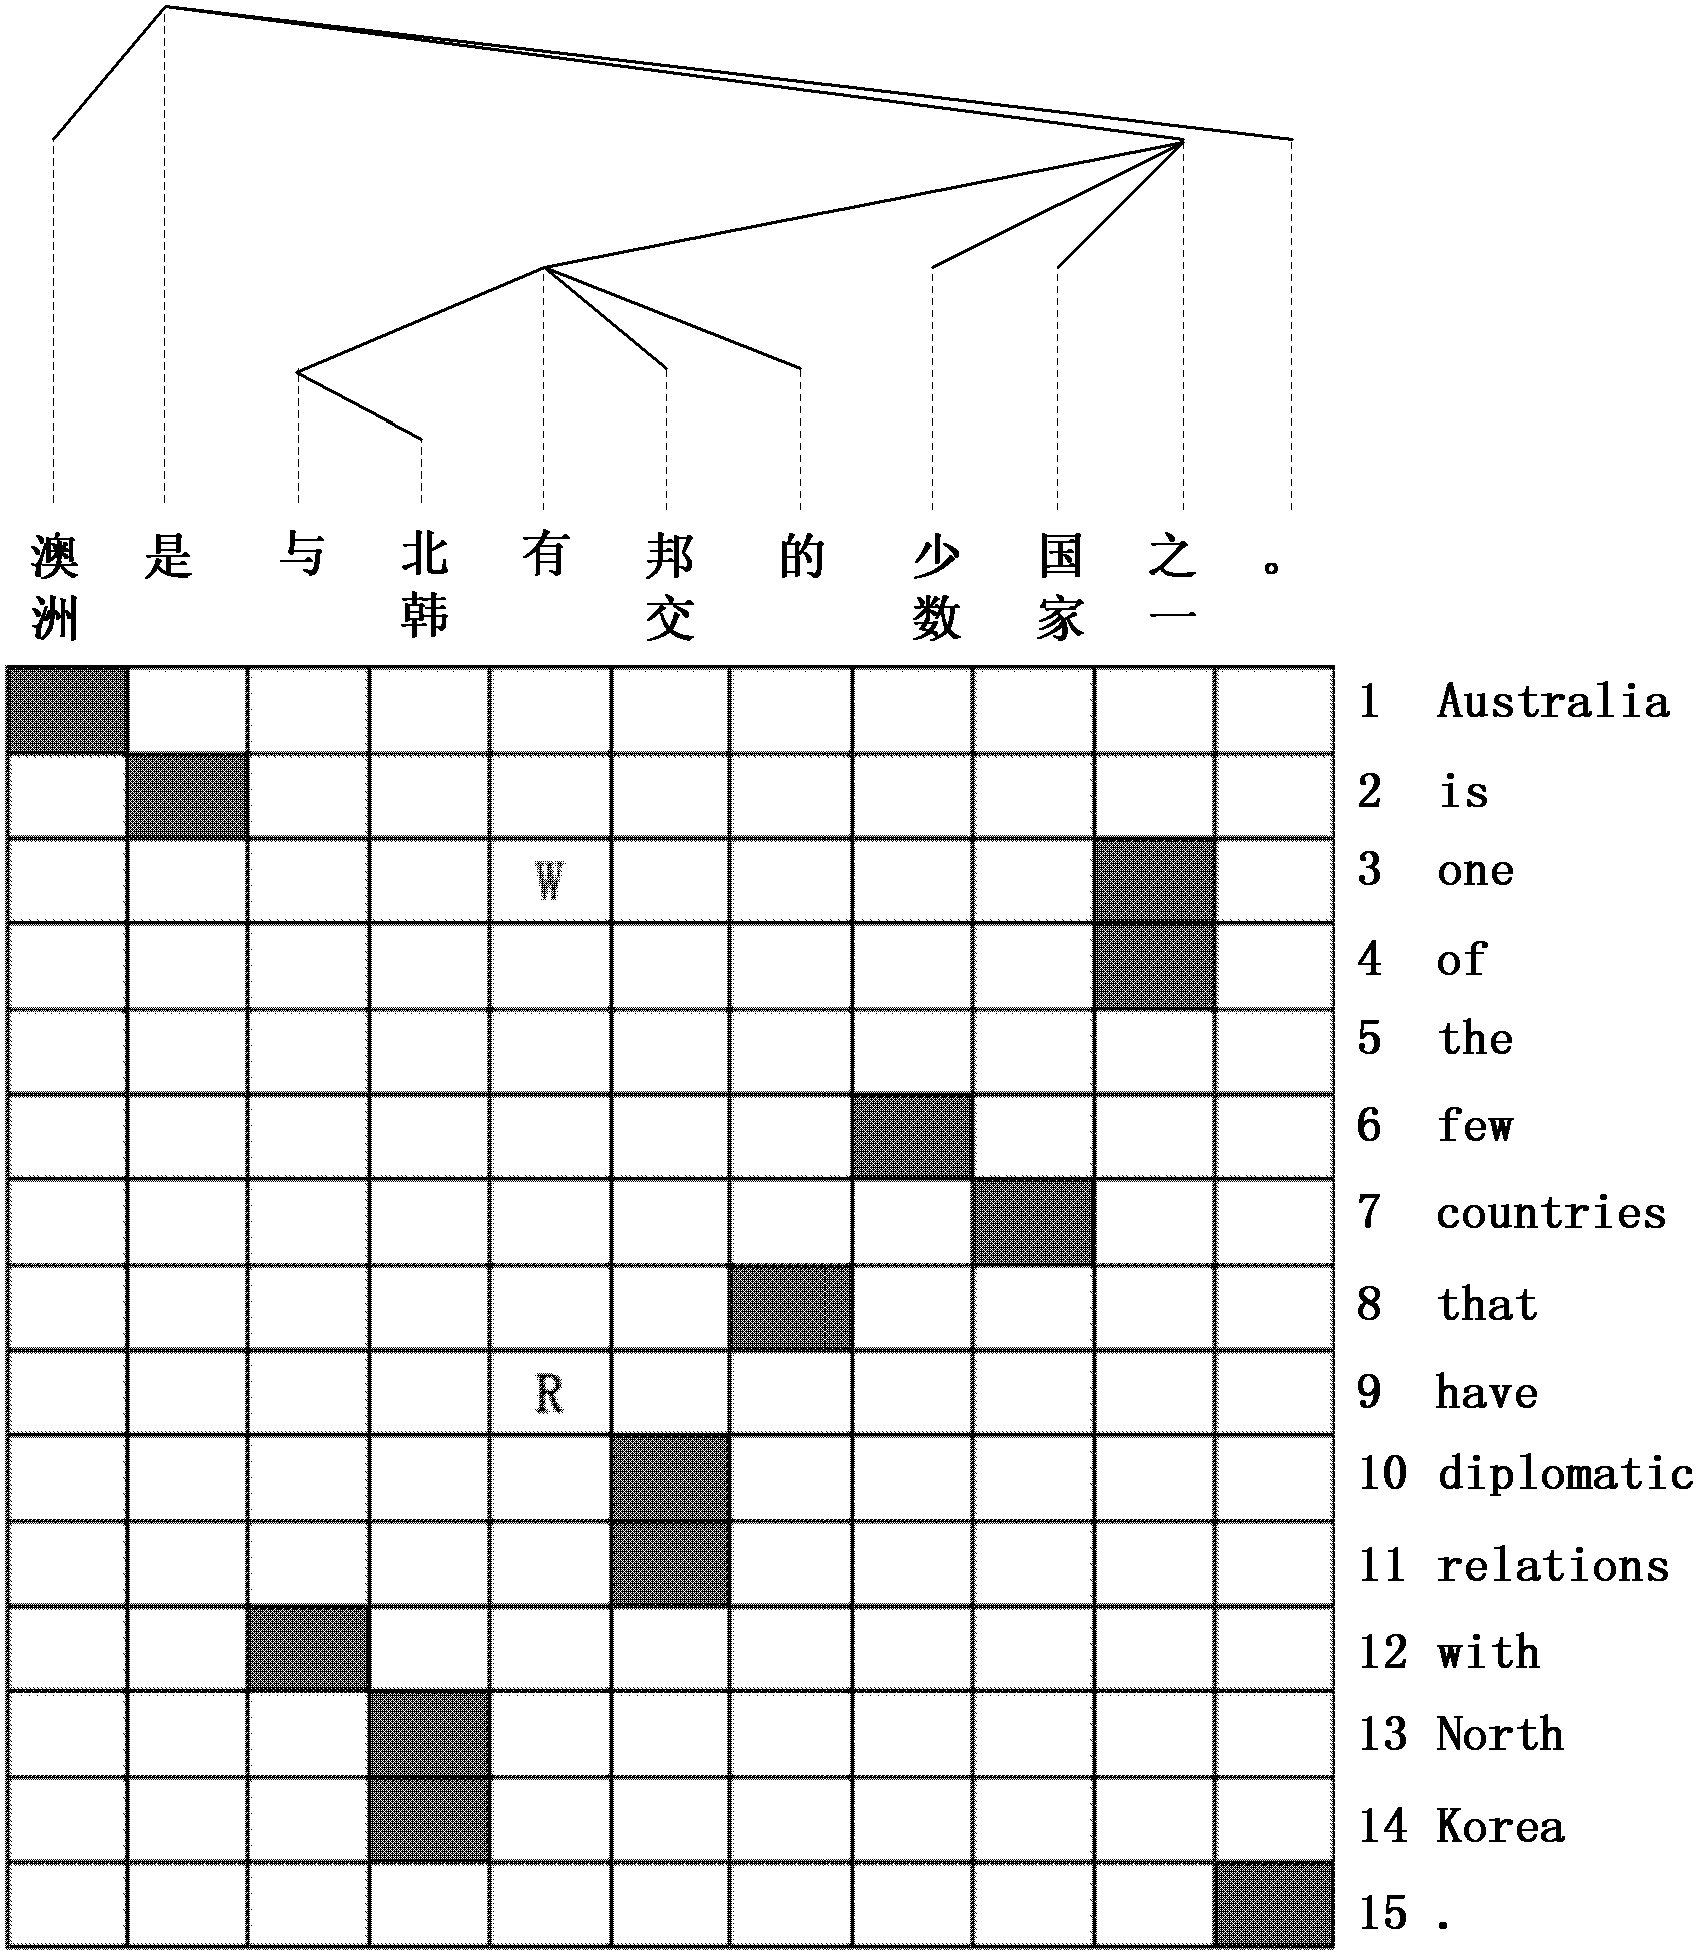 Dependency coherence constraint-based automatic alignment method for bilingual words